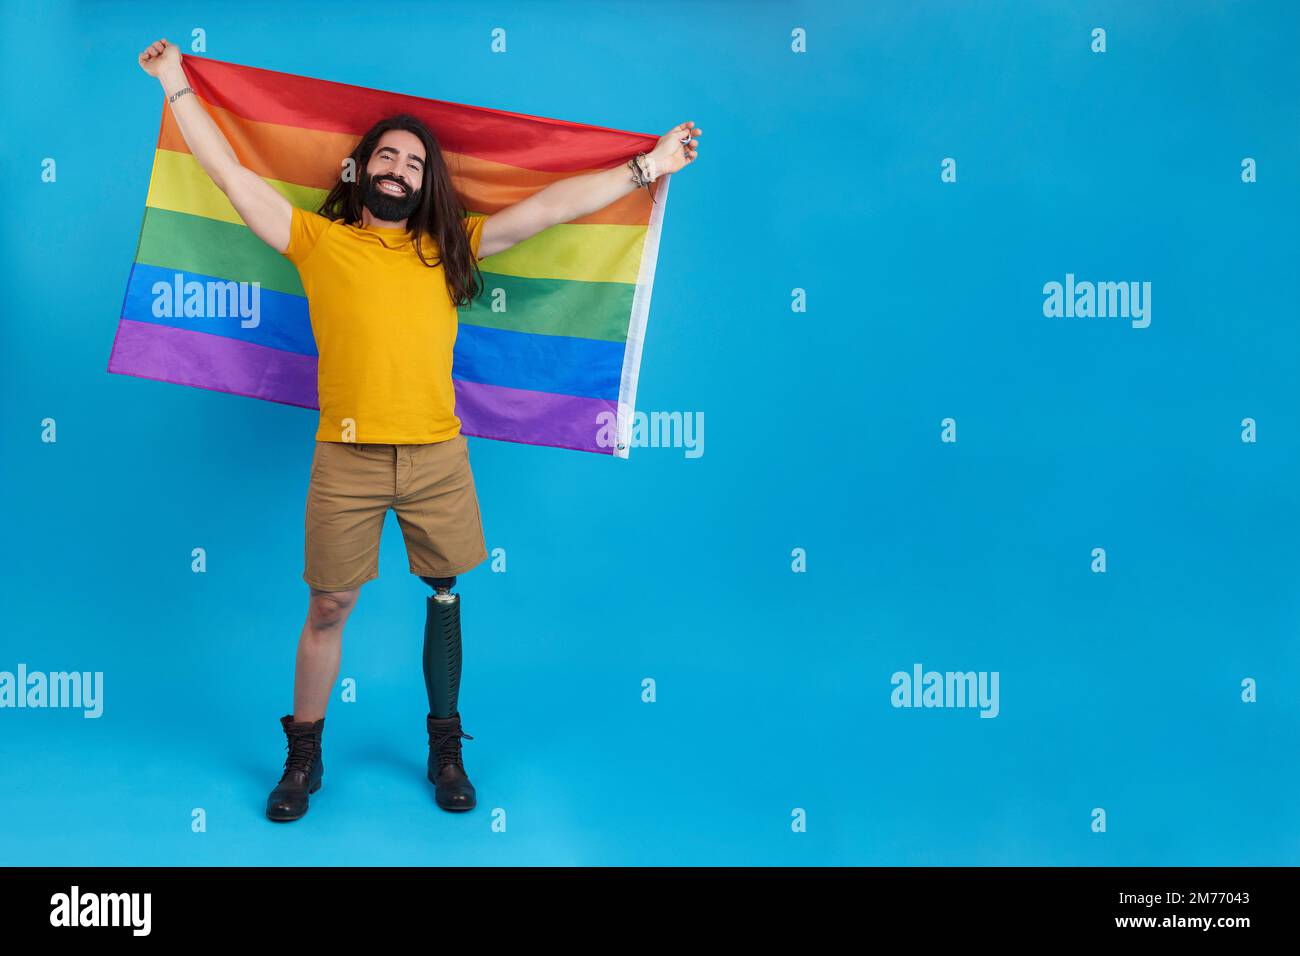 Happy man with a prosthetic leg waving a lgbt flag Stock Photo